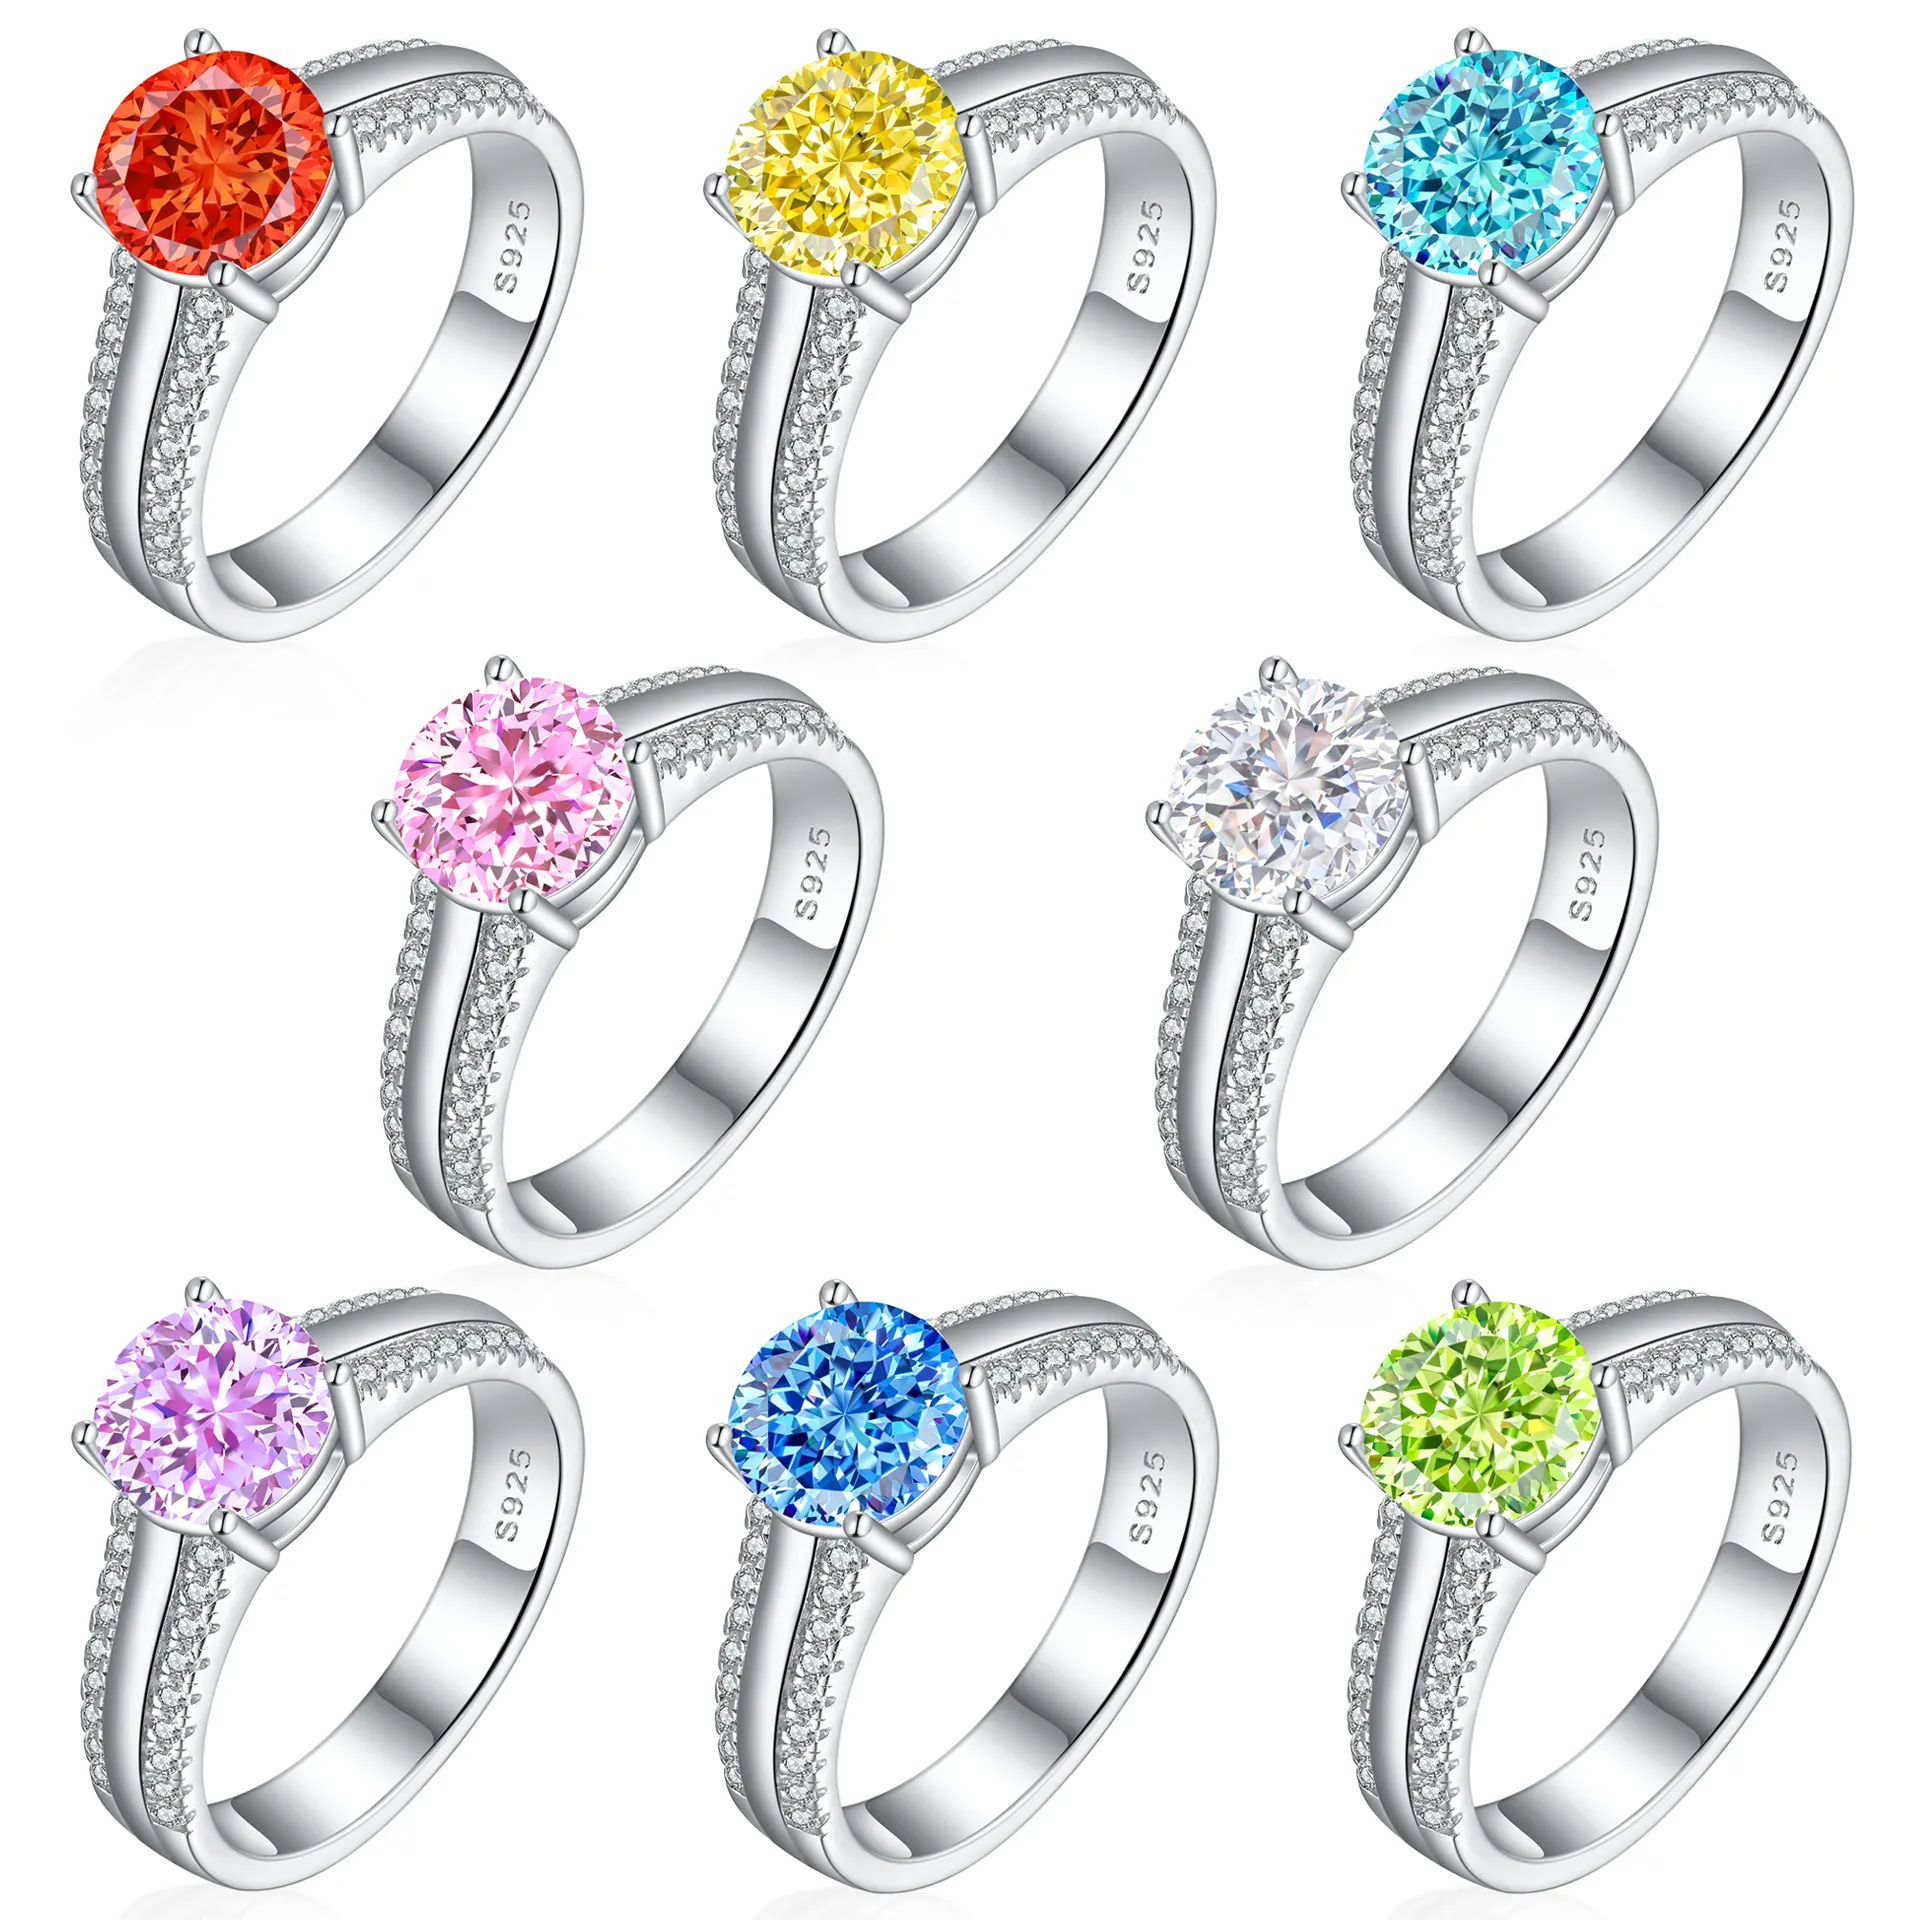 SKA Jewelry Sterling Silver 925 Ring European and American Fashion Flame Series Double Row Inlaid Round Zircon Ring